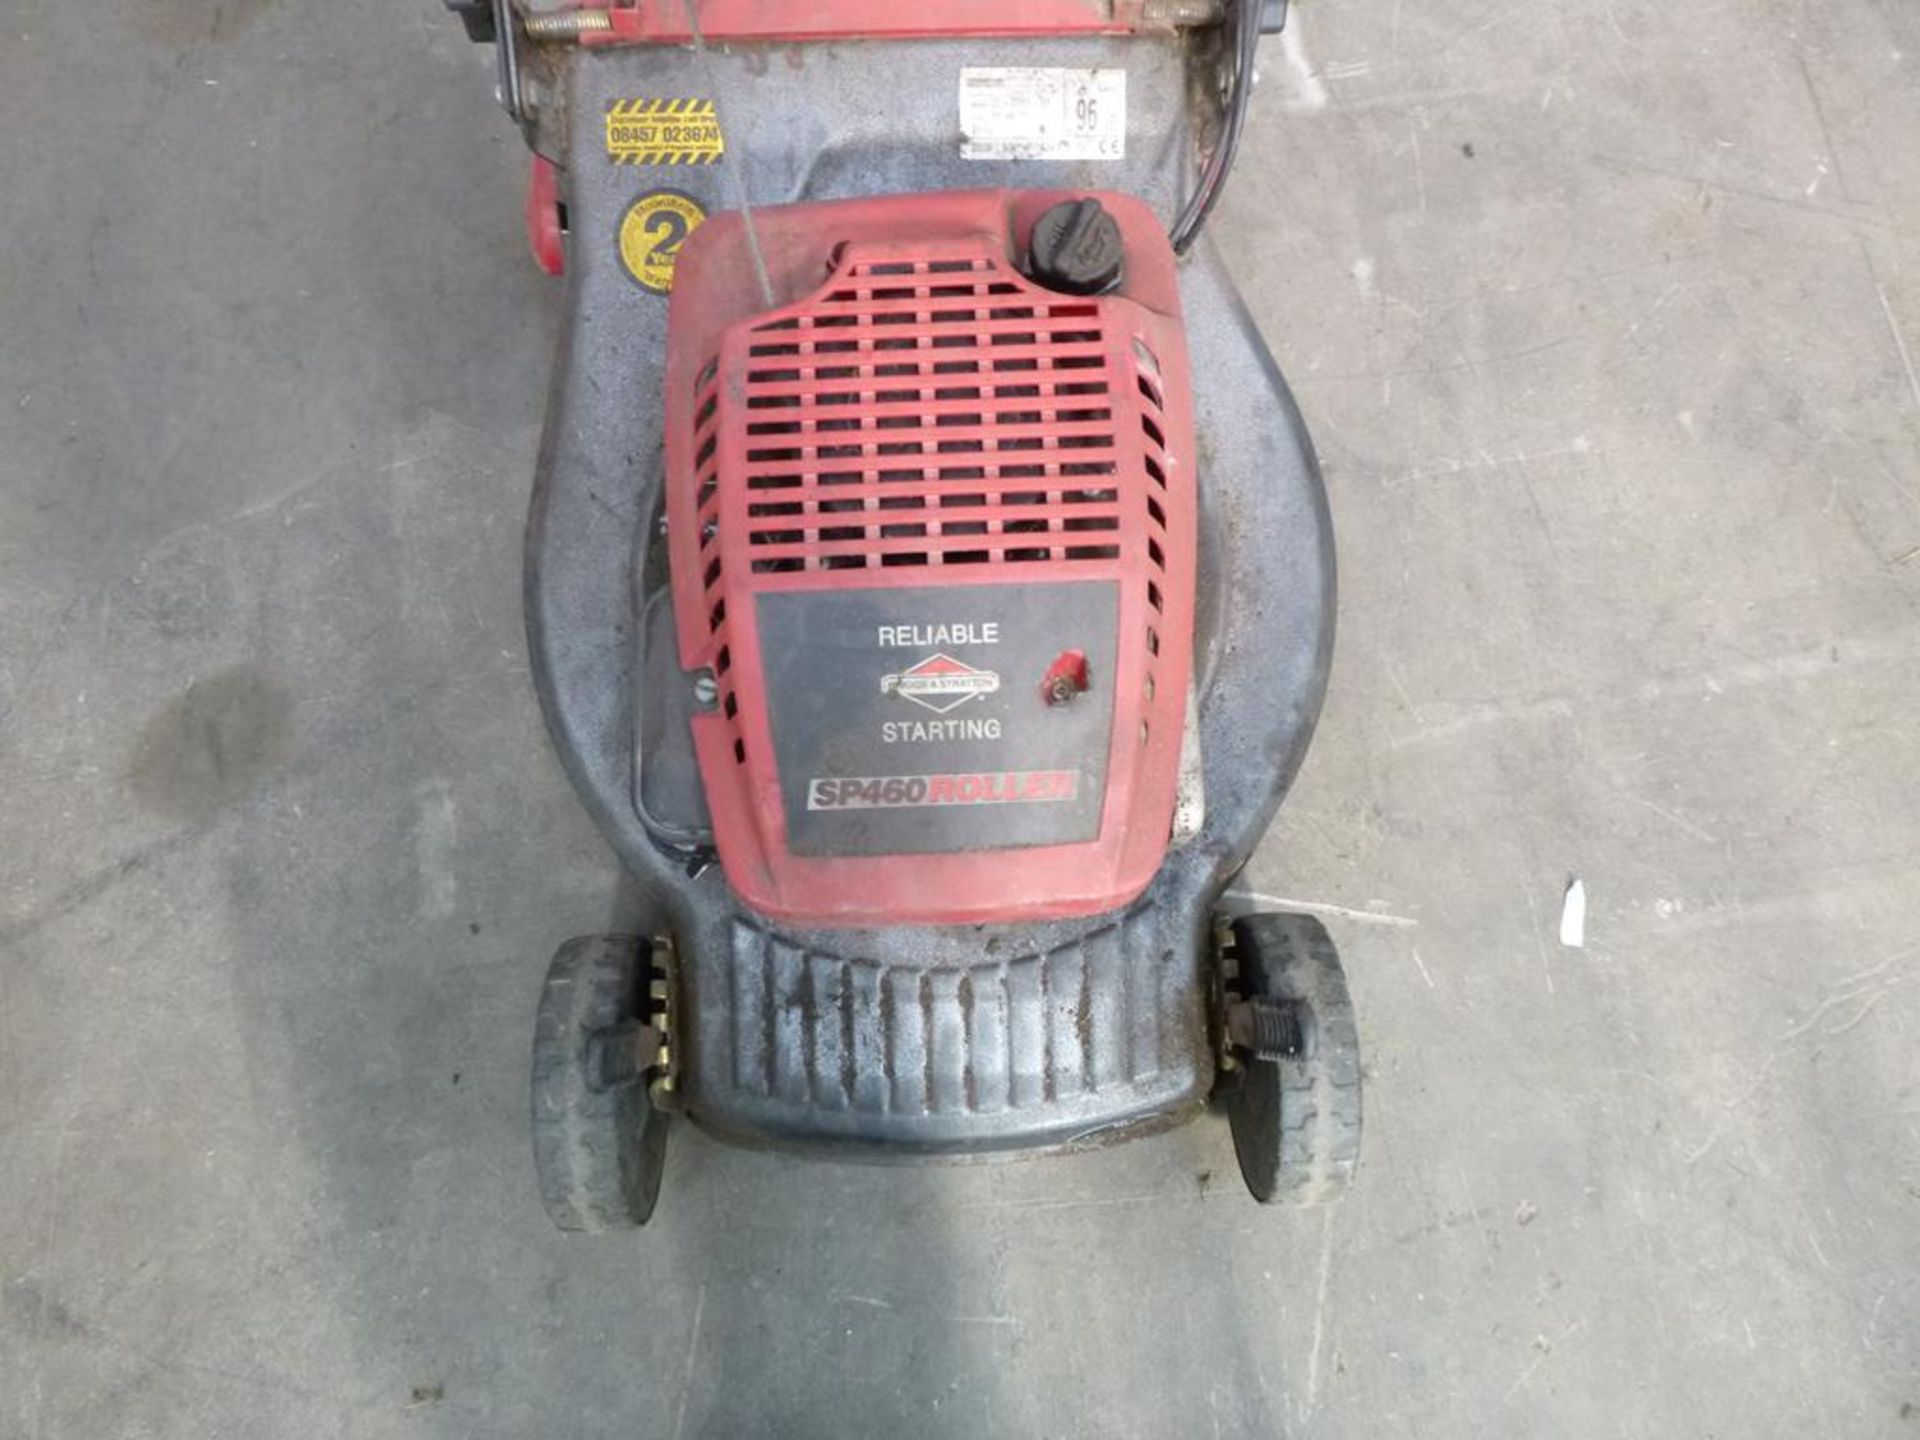 Trade In Mountfield 23-3781-92 SP460 Roller Petrol Powered Briggs & Stratton Engine Lawnmower - Image 3 of 4